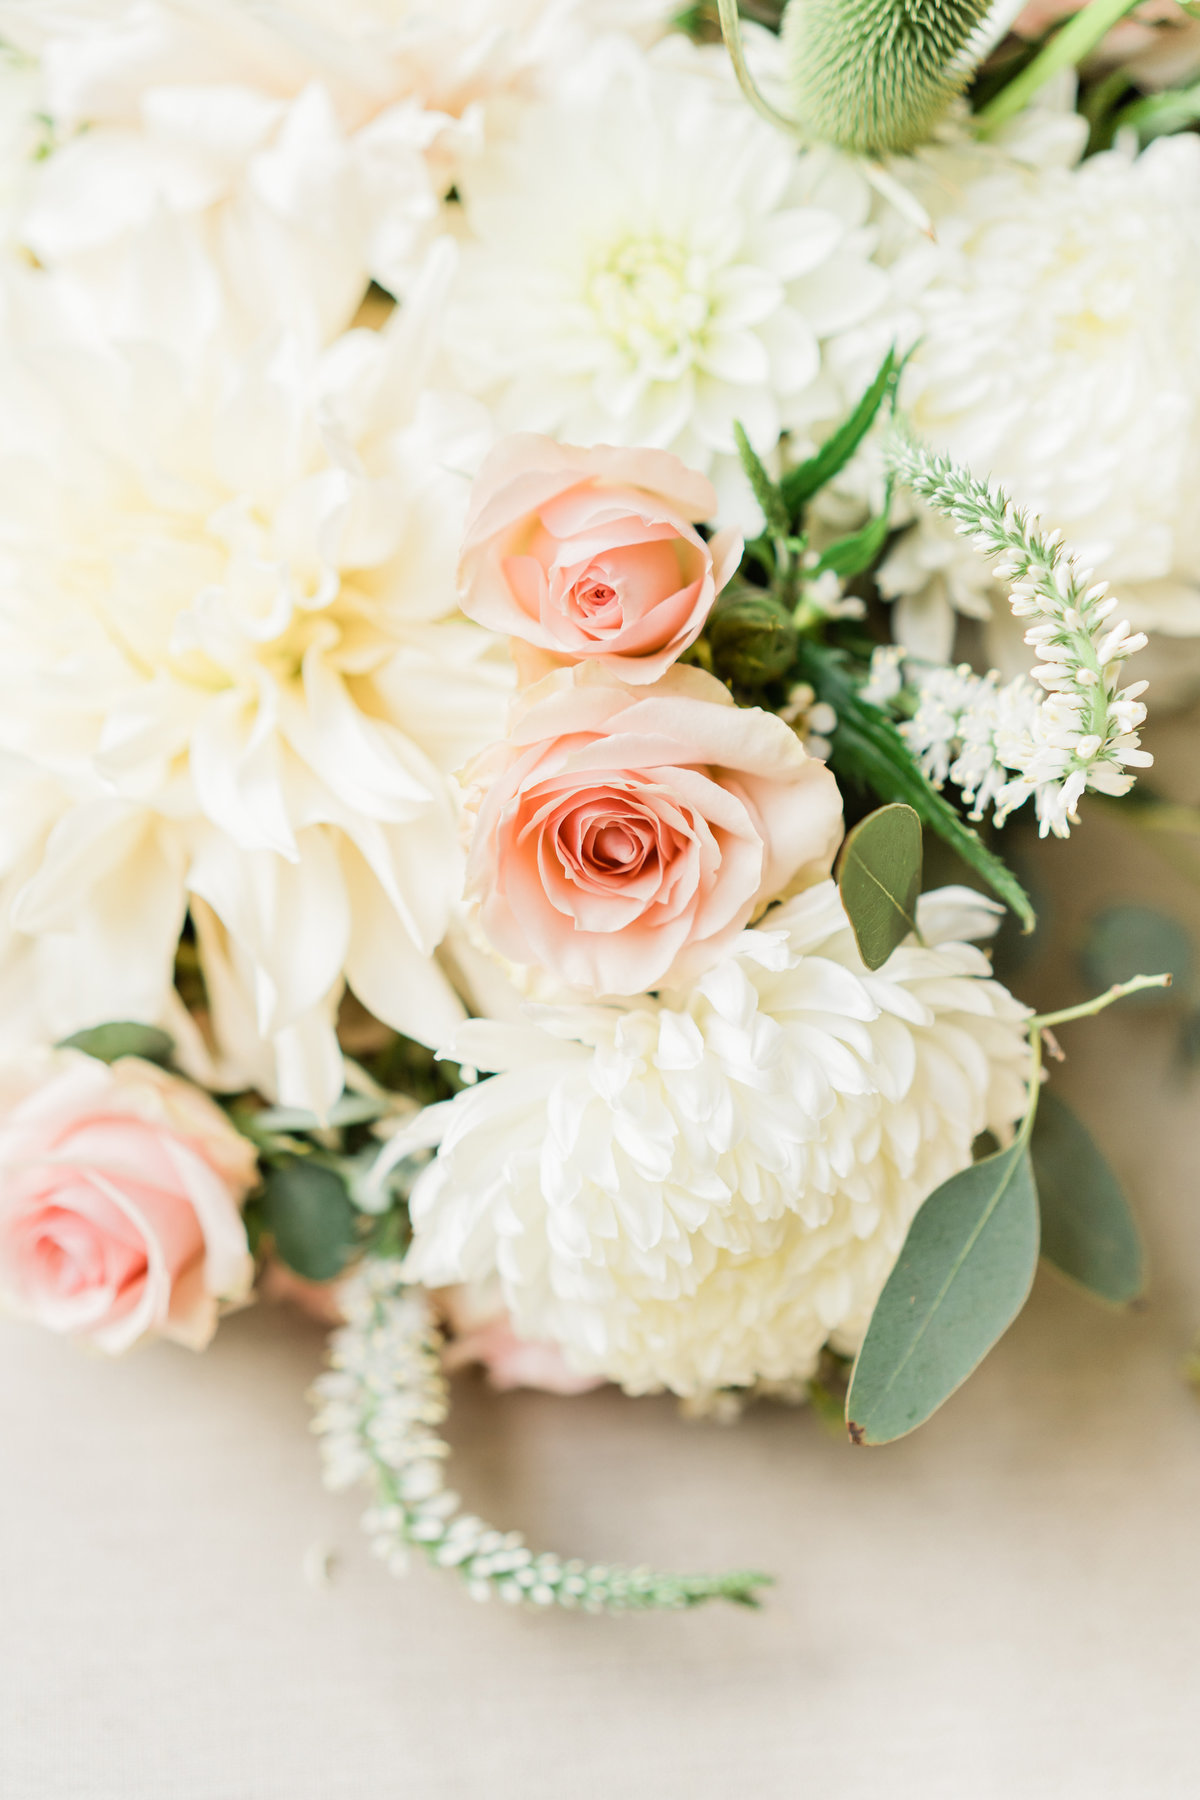 Wedding bouquet with white and pink flowers